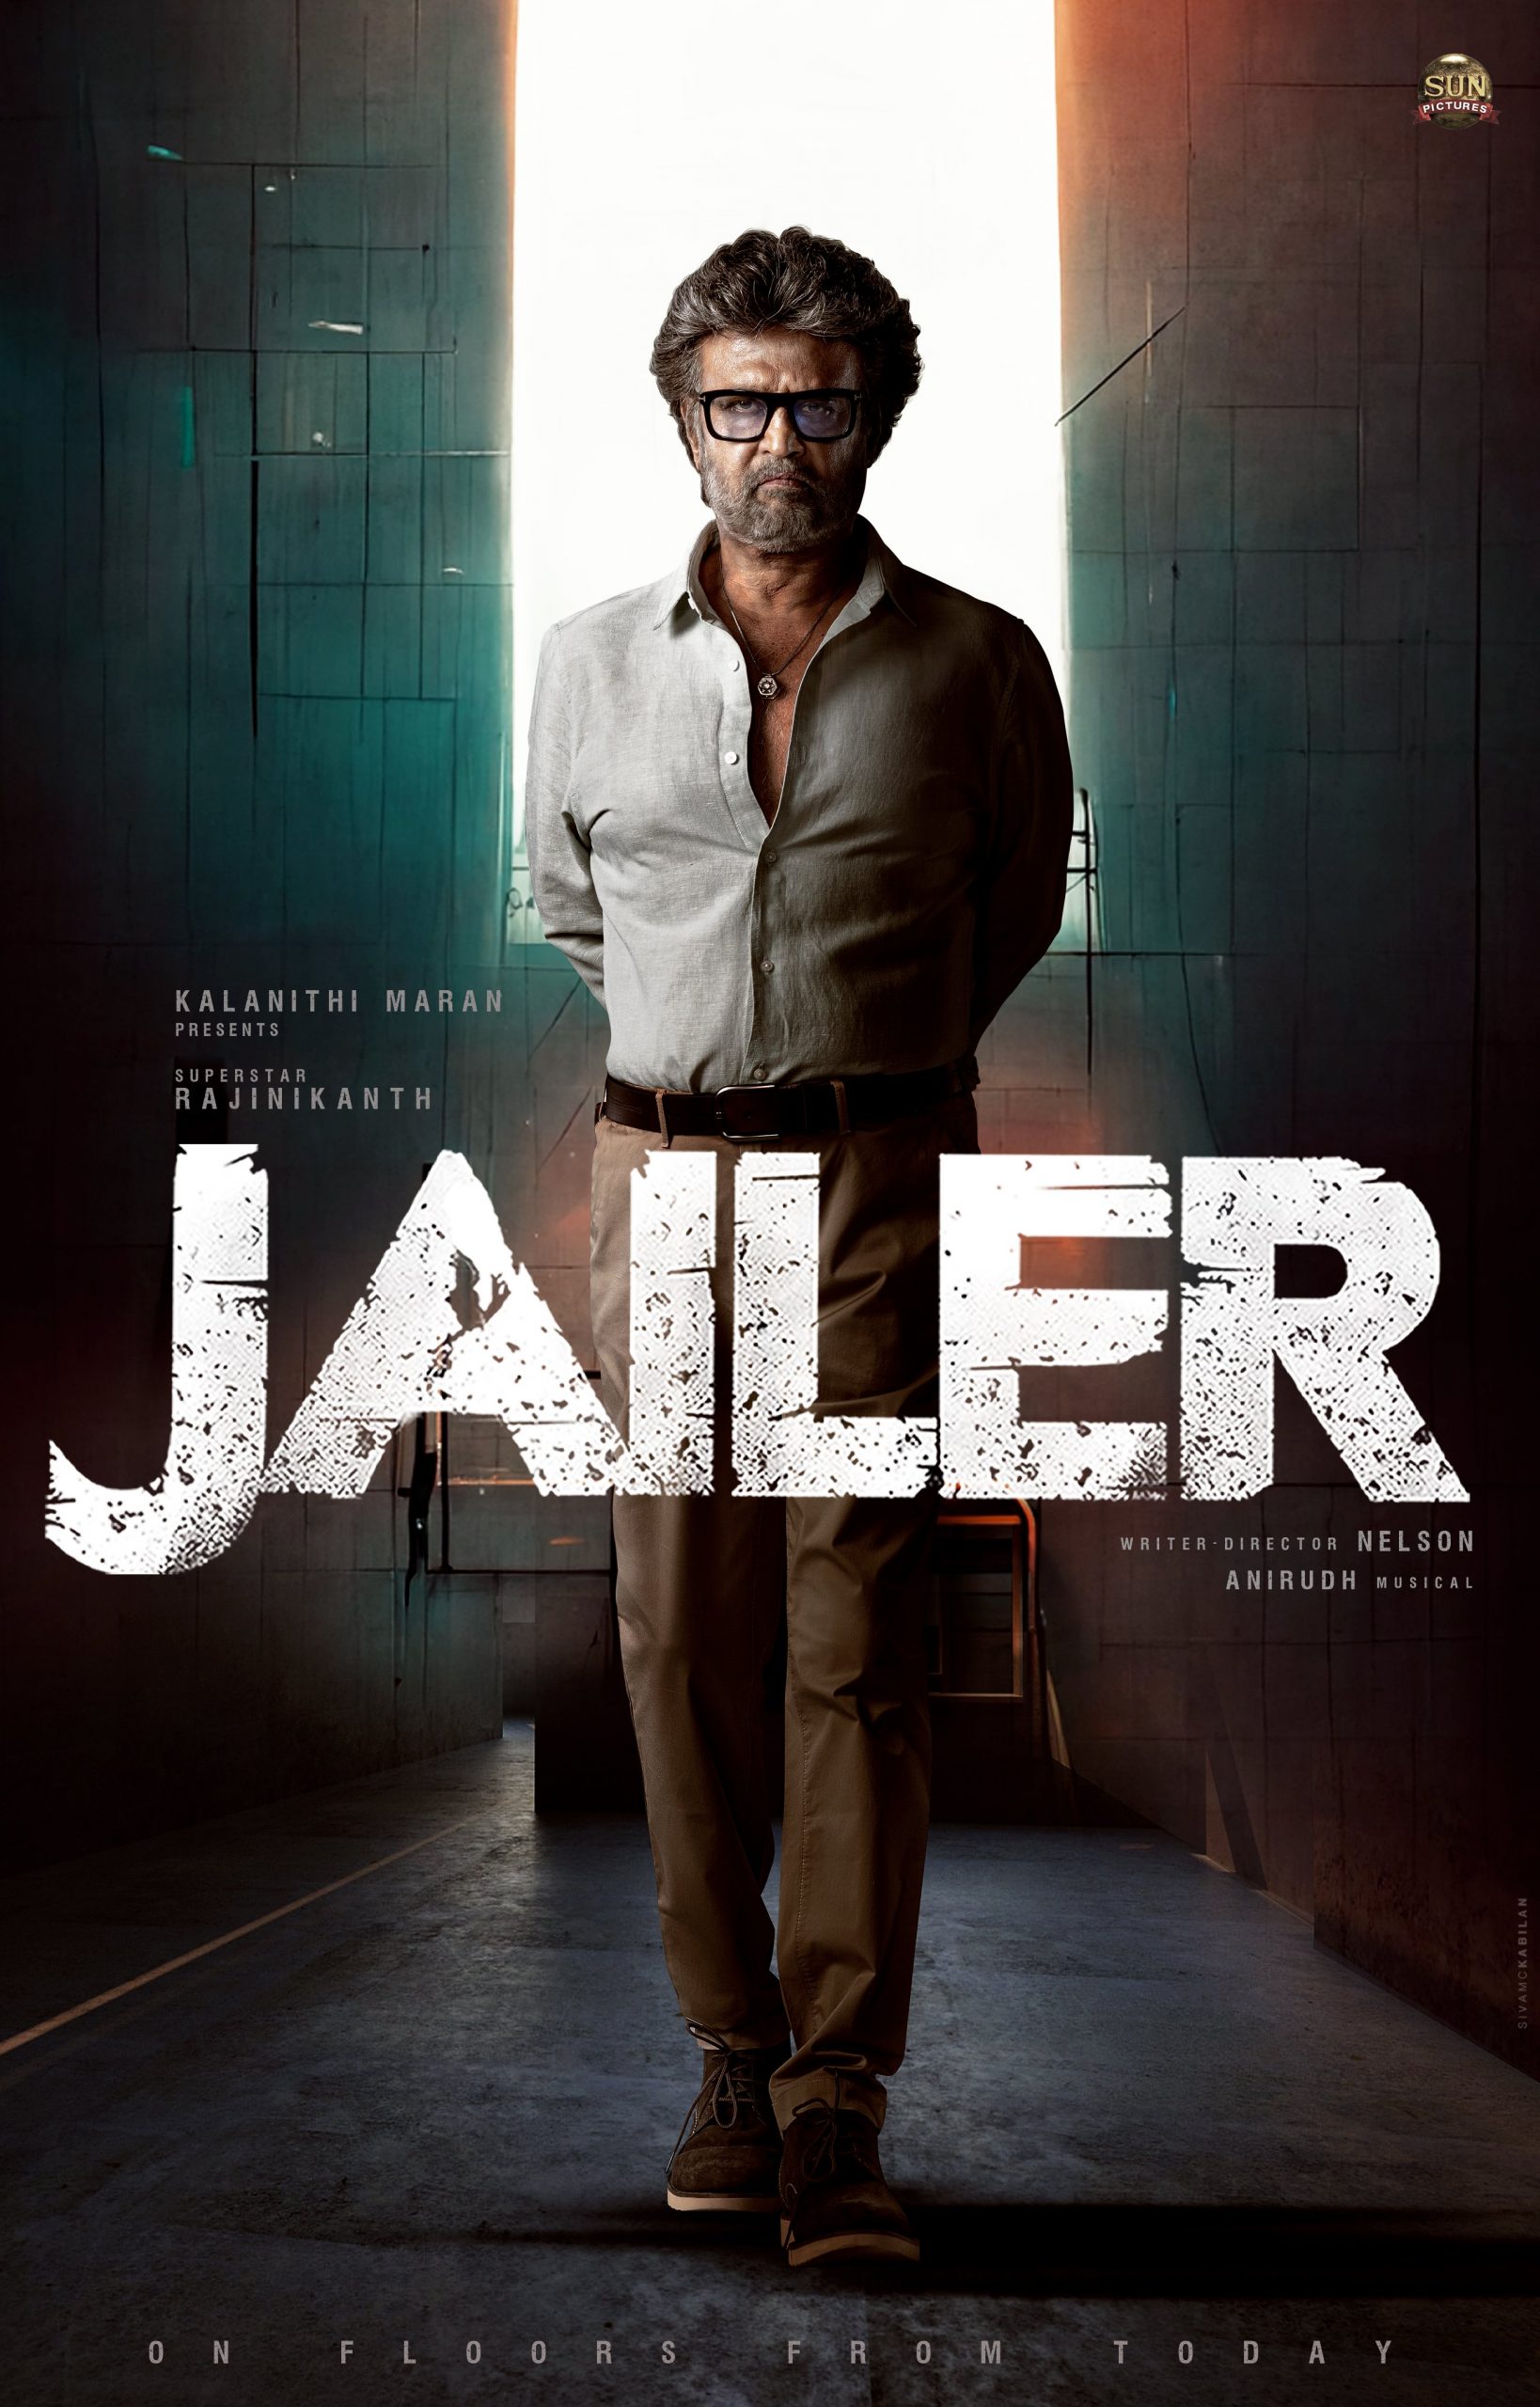 jailer movie review rotten tomatoes